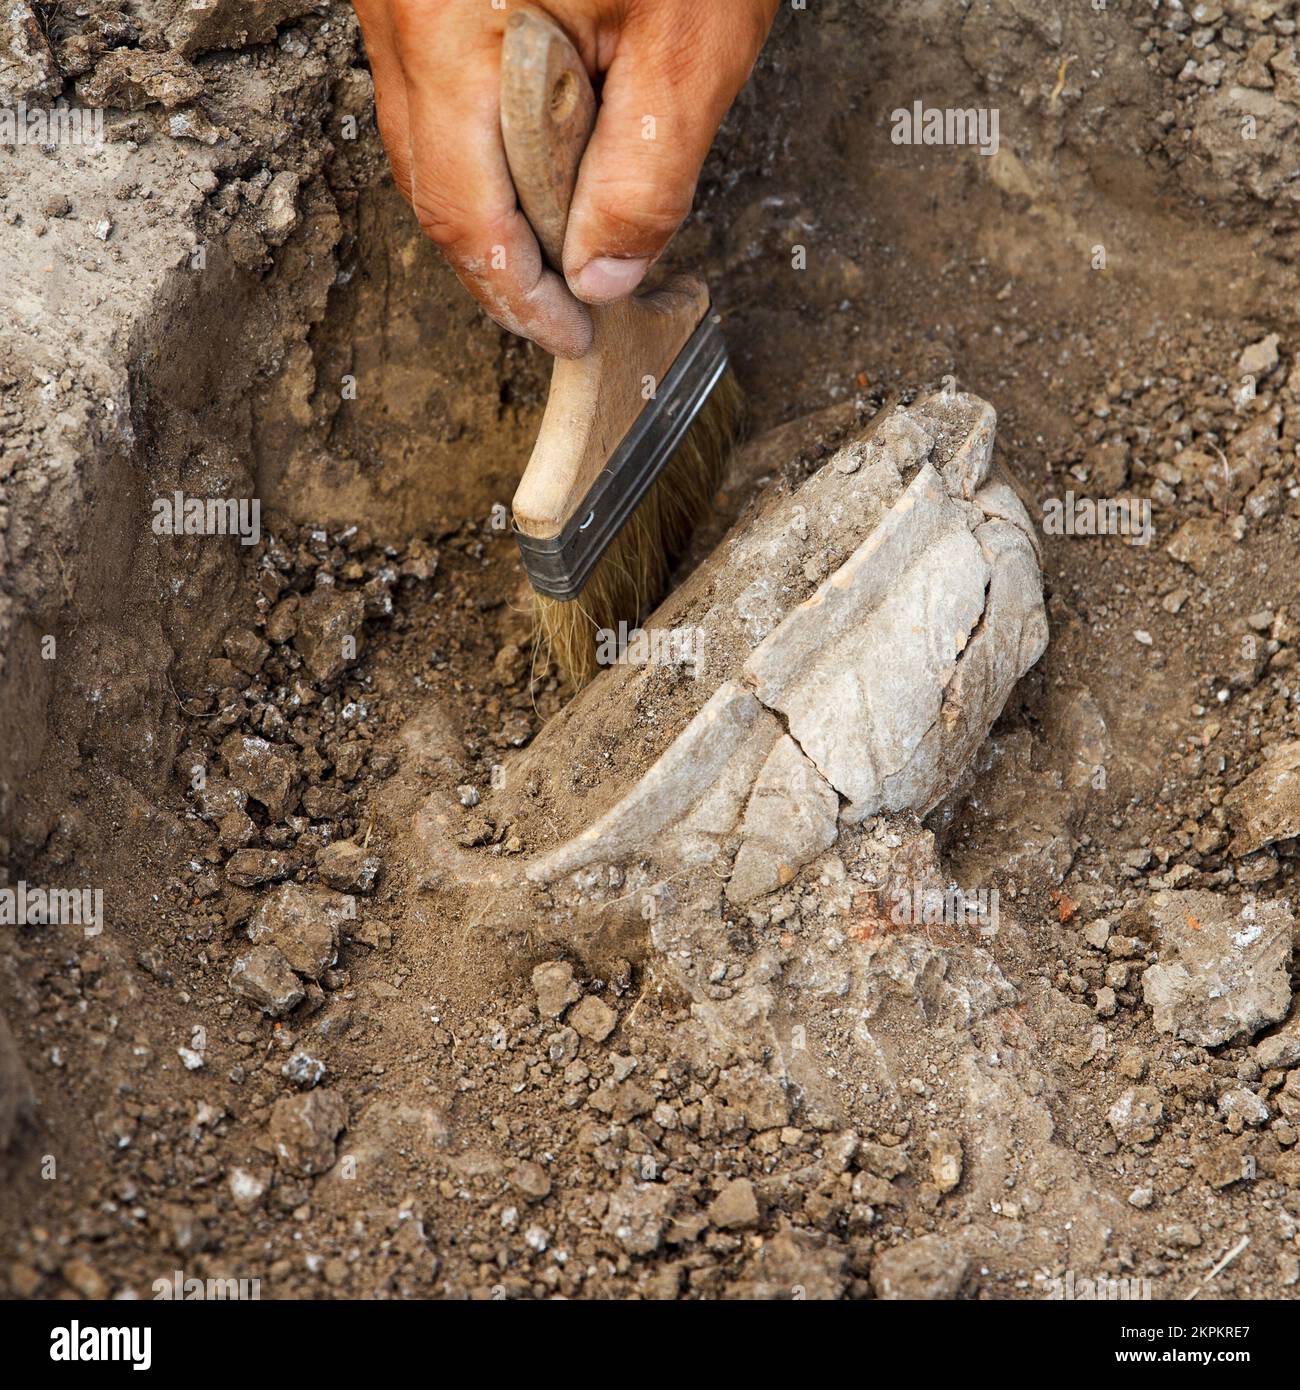 Professional Archaeological excavations, archaeologists work, dig up an ...